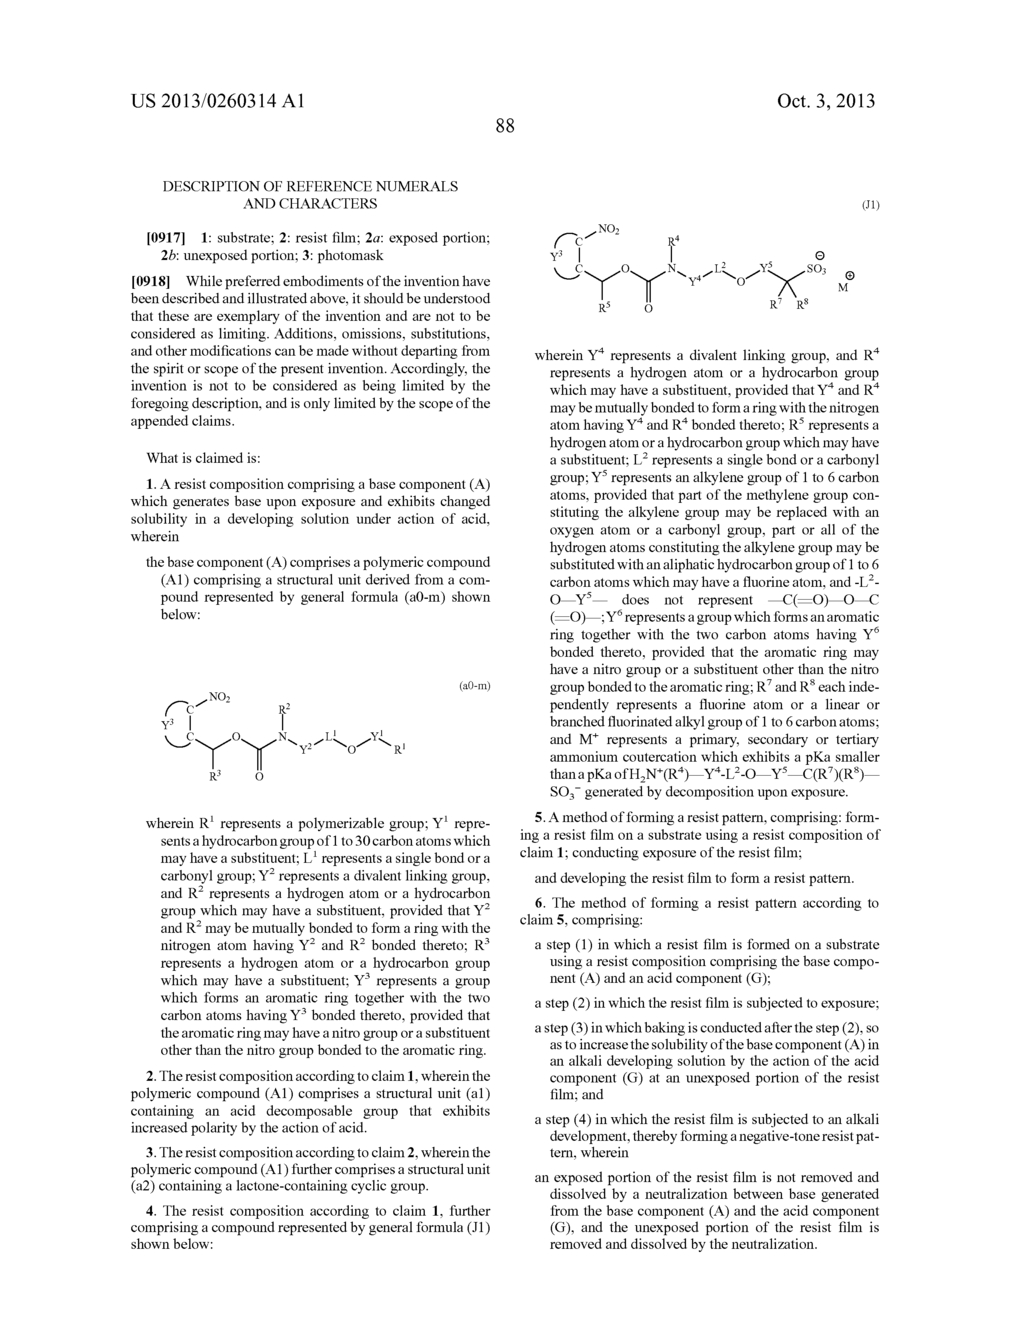 RESIST COMPOSITION, METHOD OF FORMING RESIST PATTERN, COMPOUND AND     POLYMERIC COMPOUND - diagram, schematic, and image 90